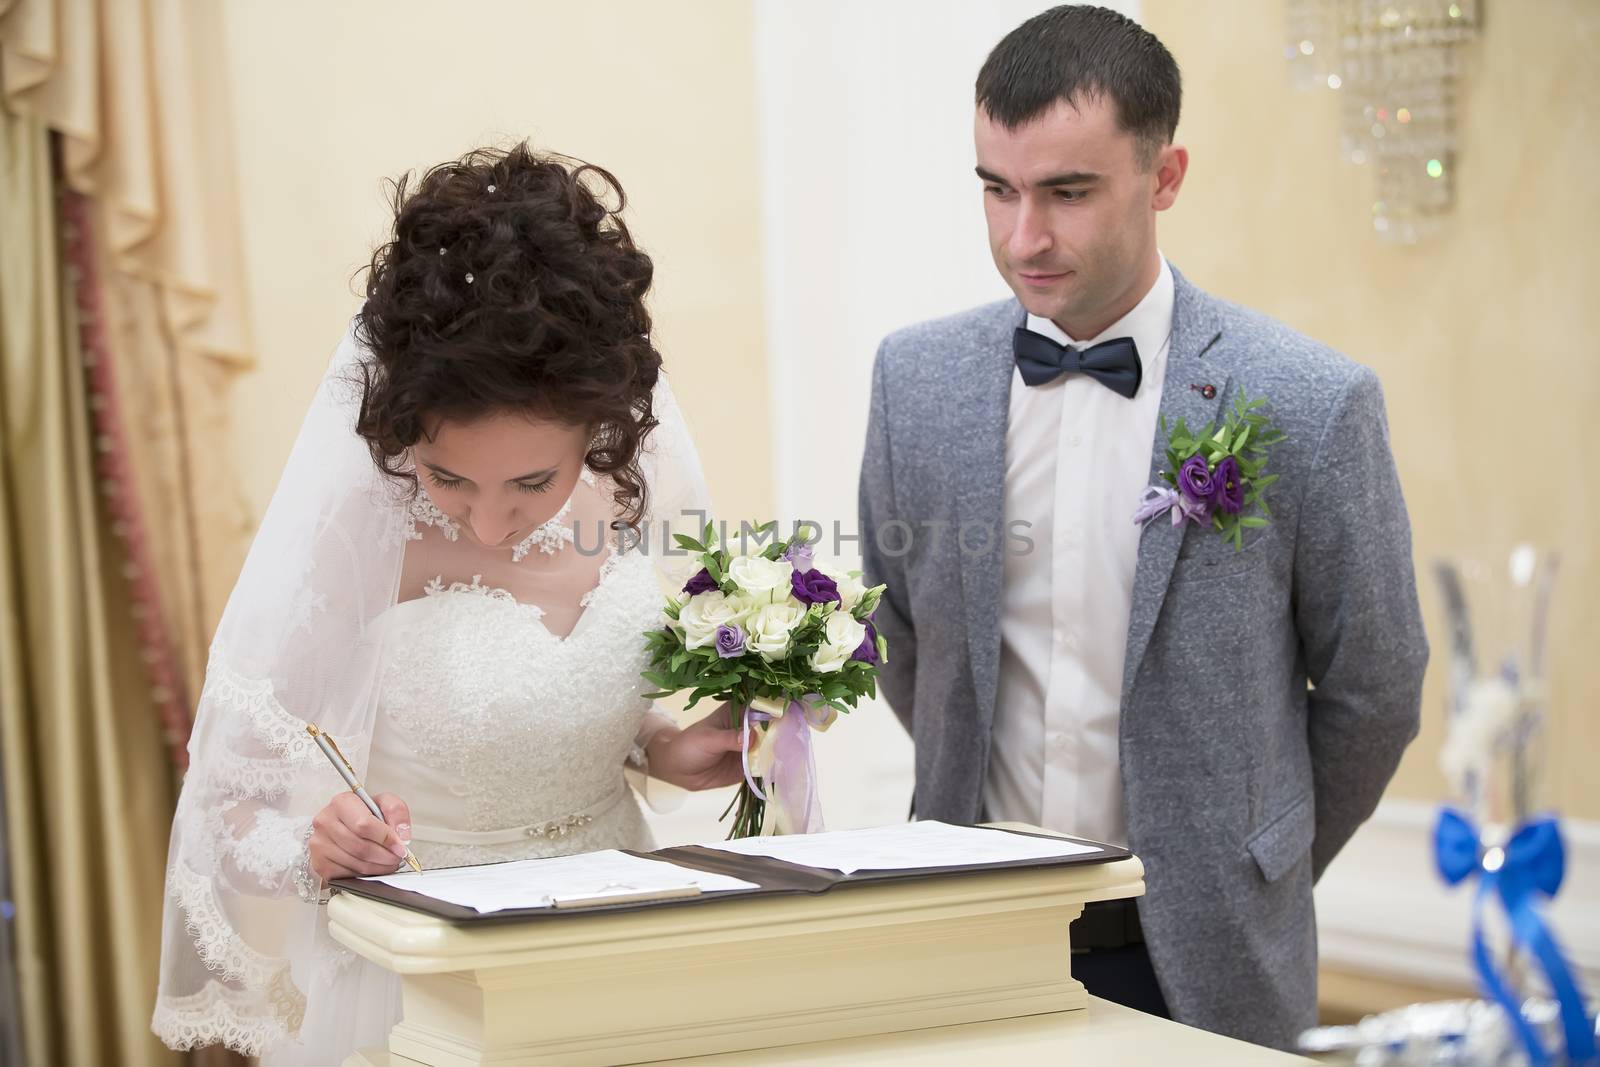 The bride and groom register in the registry office